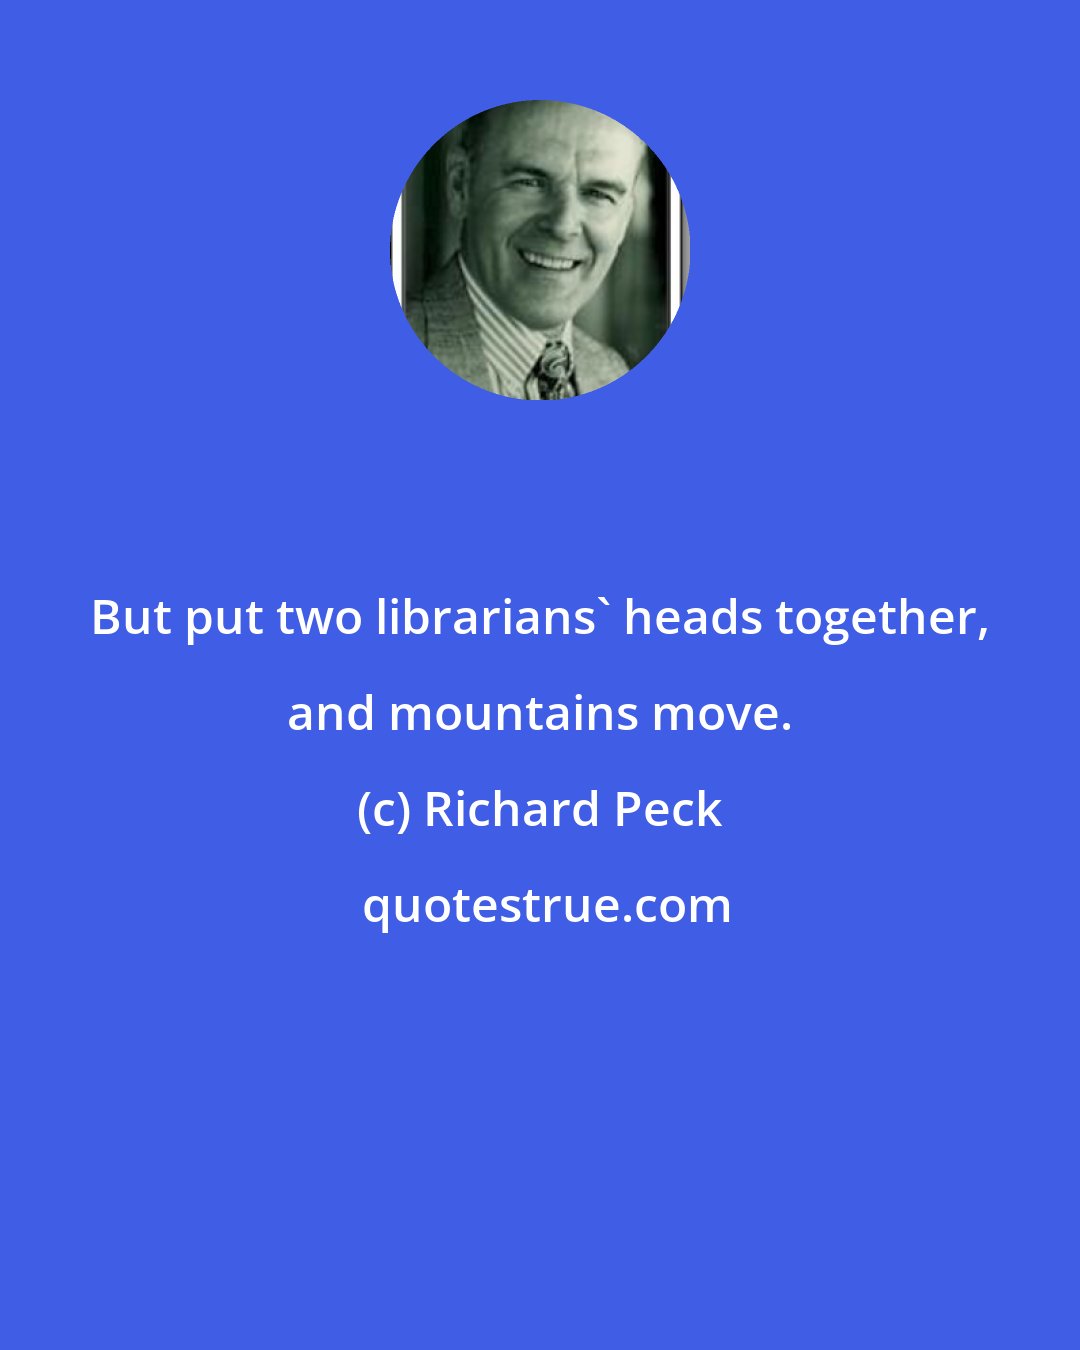 Richard Peck: But put two librarians' heads together, and mountains move.